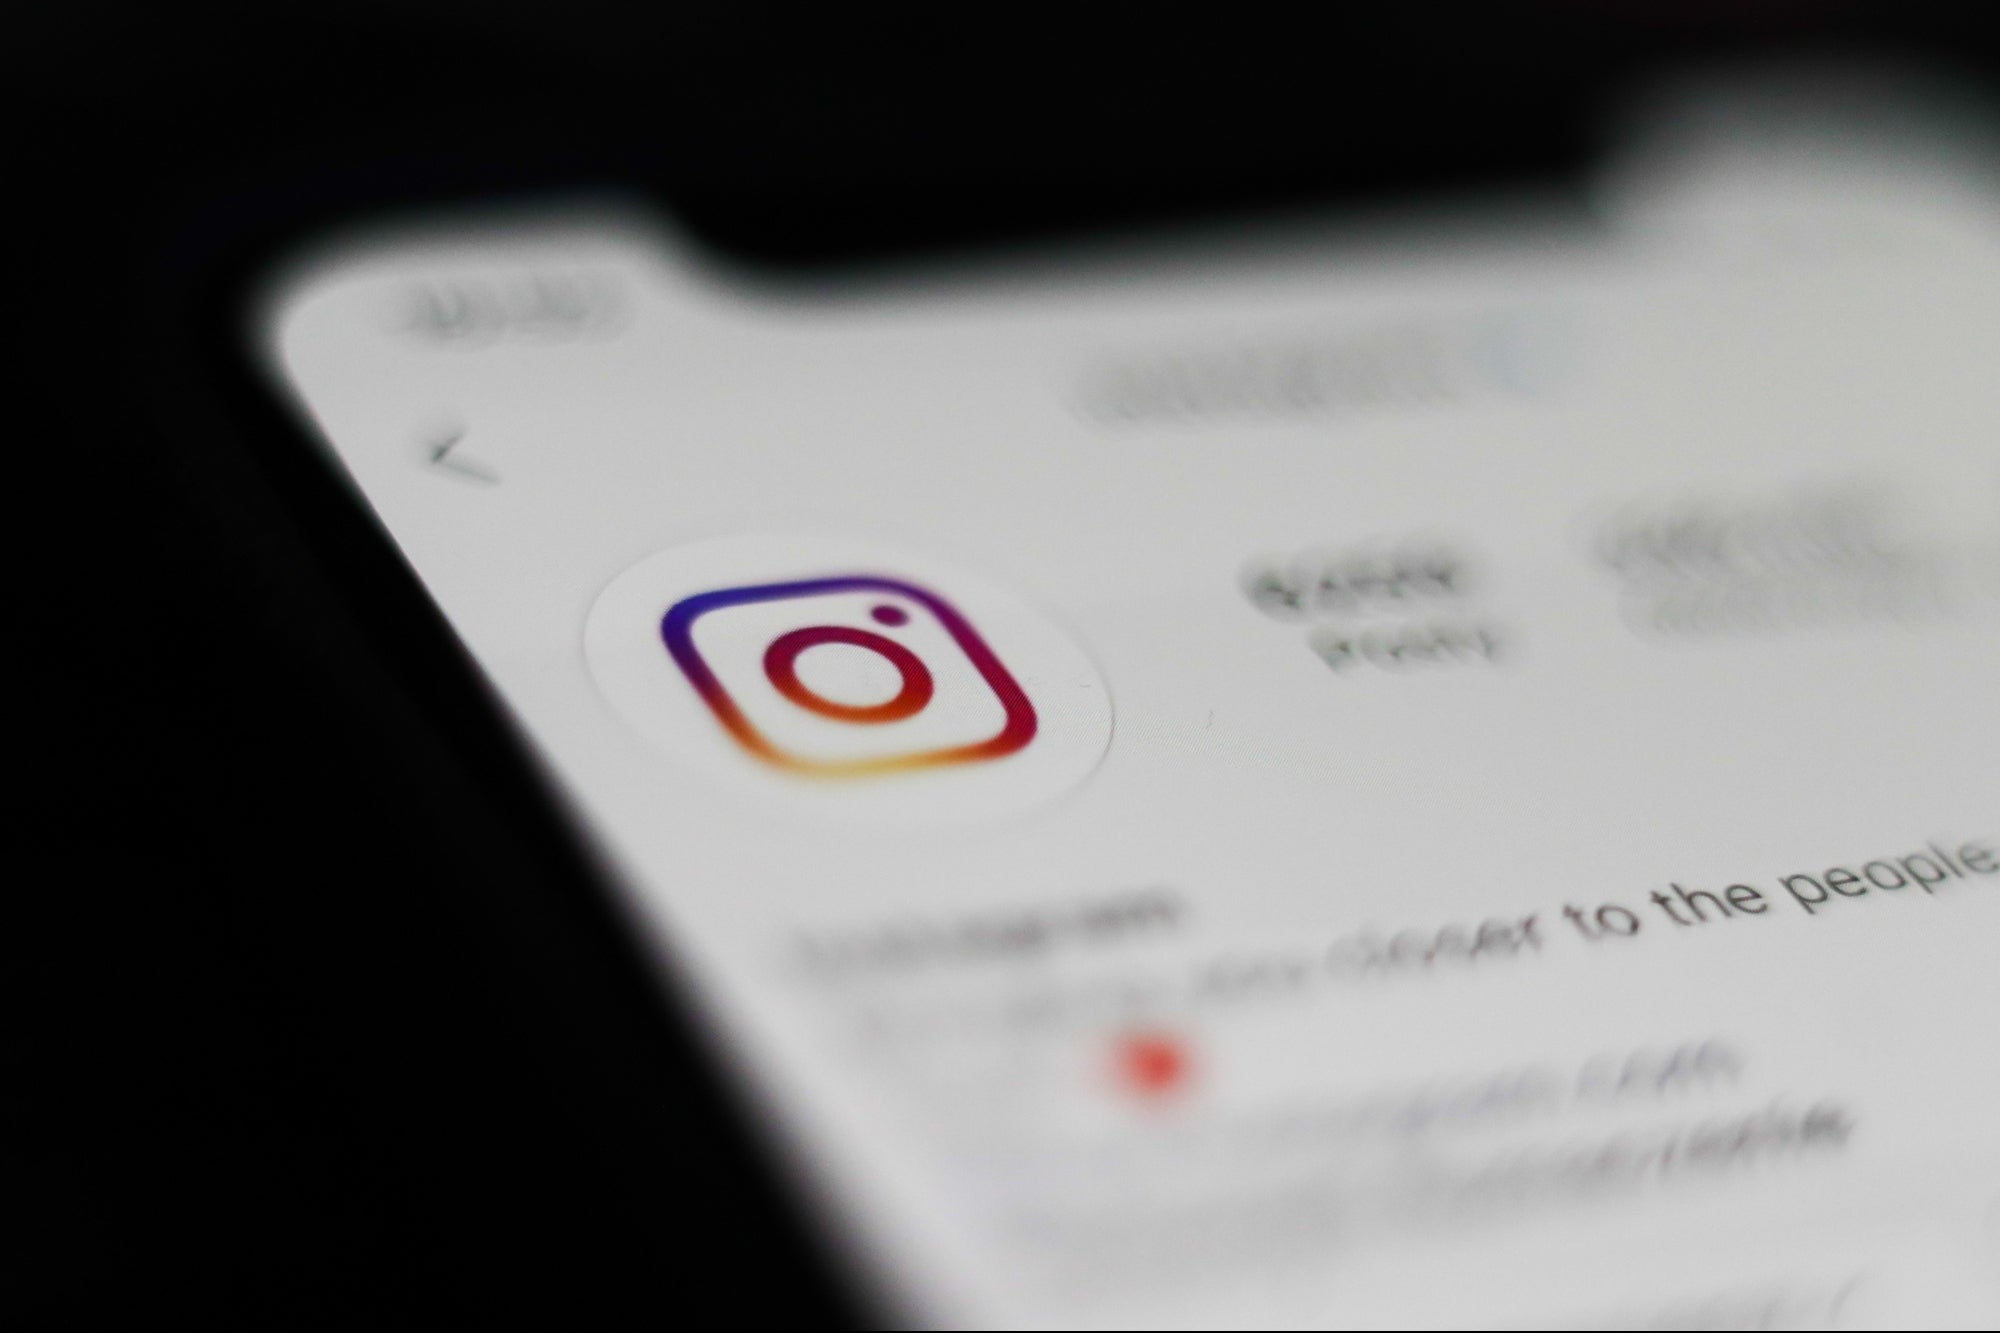 How to Send a Networking DM on Instagram That Works